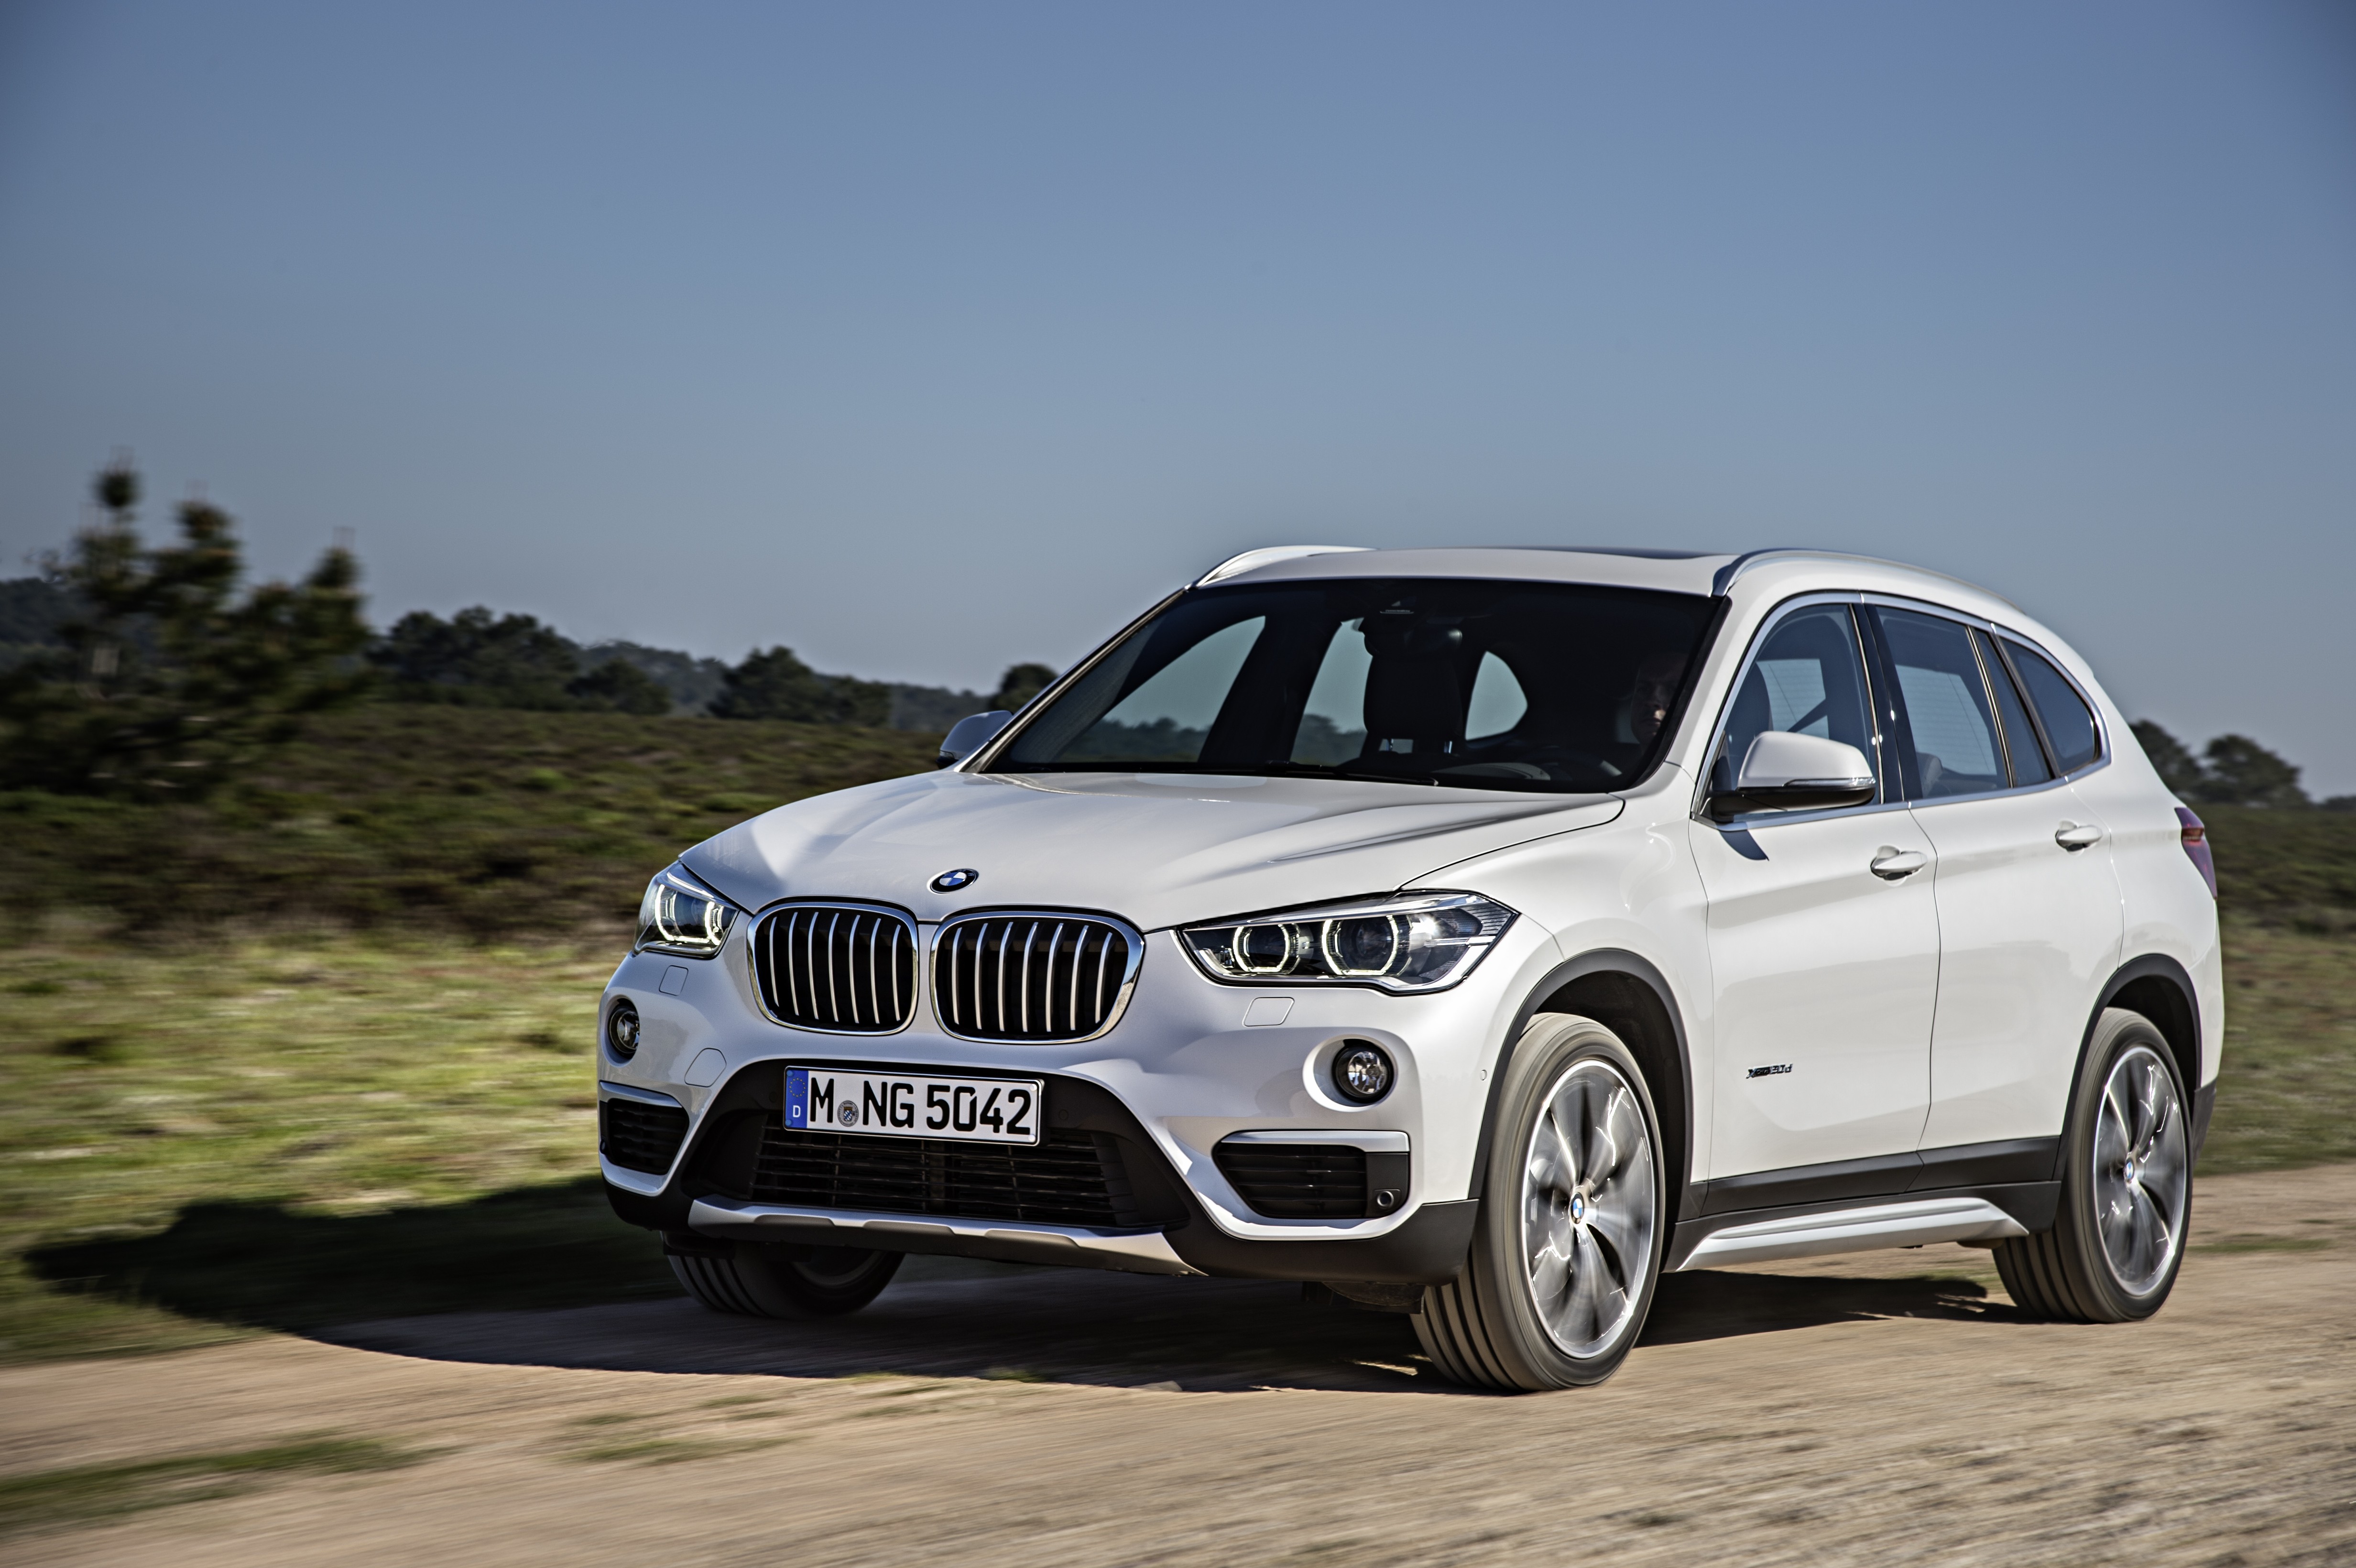 2016 BMW X1 World Premiere The New Crossover Is Finally Here